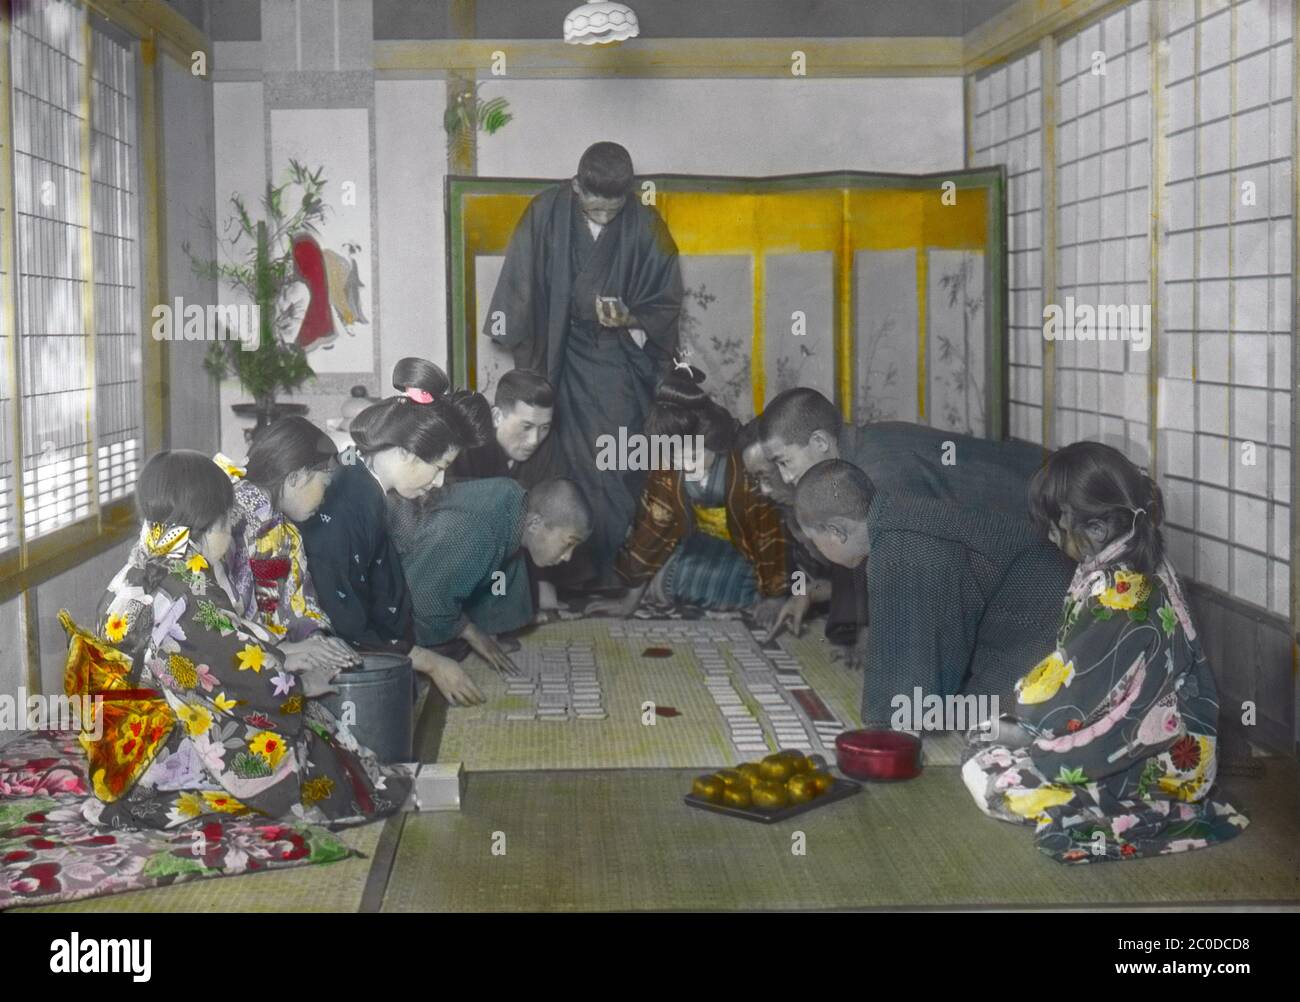 [ 1900s Japan - Playing Karuta at New Year ] — Family members playing Karuta during New Year.  One person reads part of a poem on a yomifuda (reading) card, while others try to be the first to get the corresponding torifuda (grabbing) cards with the rest of the poem.  The poems are from the classical Japanese anthology of one hundred Japanese waka by one hundred poets known as Ogura Hyakunin Isshu (小倉百人一首).  The game is still played during New Year today.   20th century vintage glass slide. Stock Photo